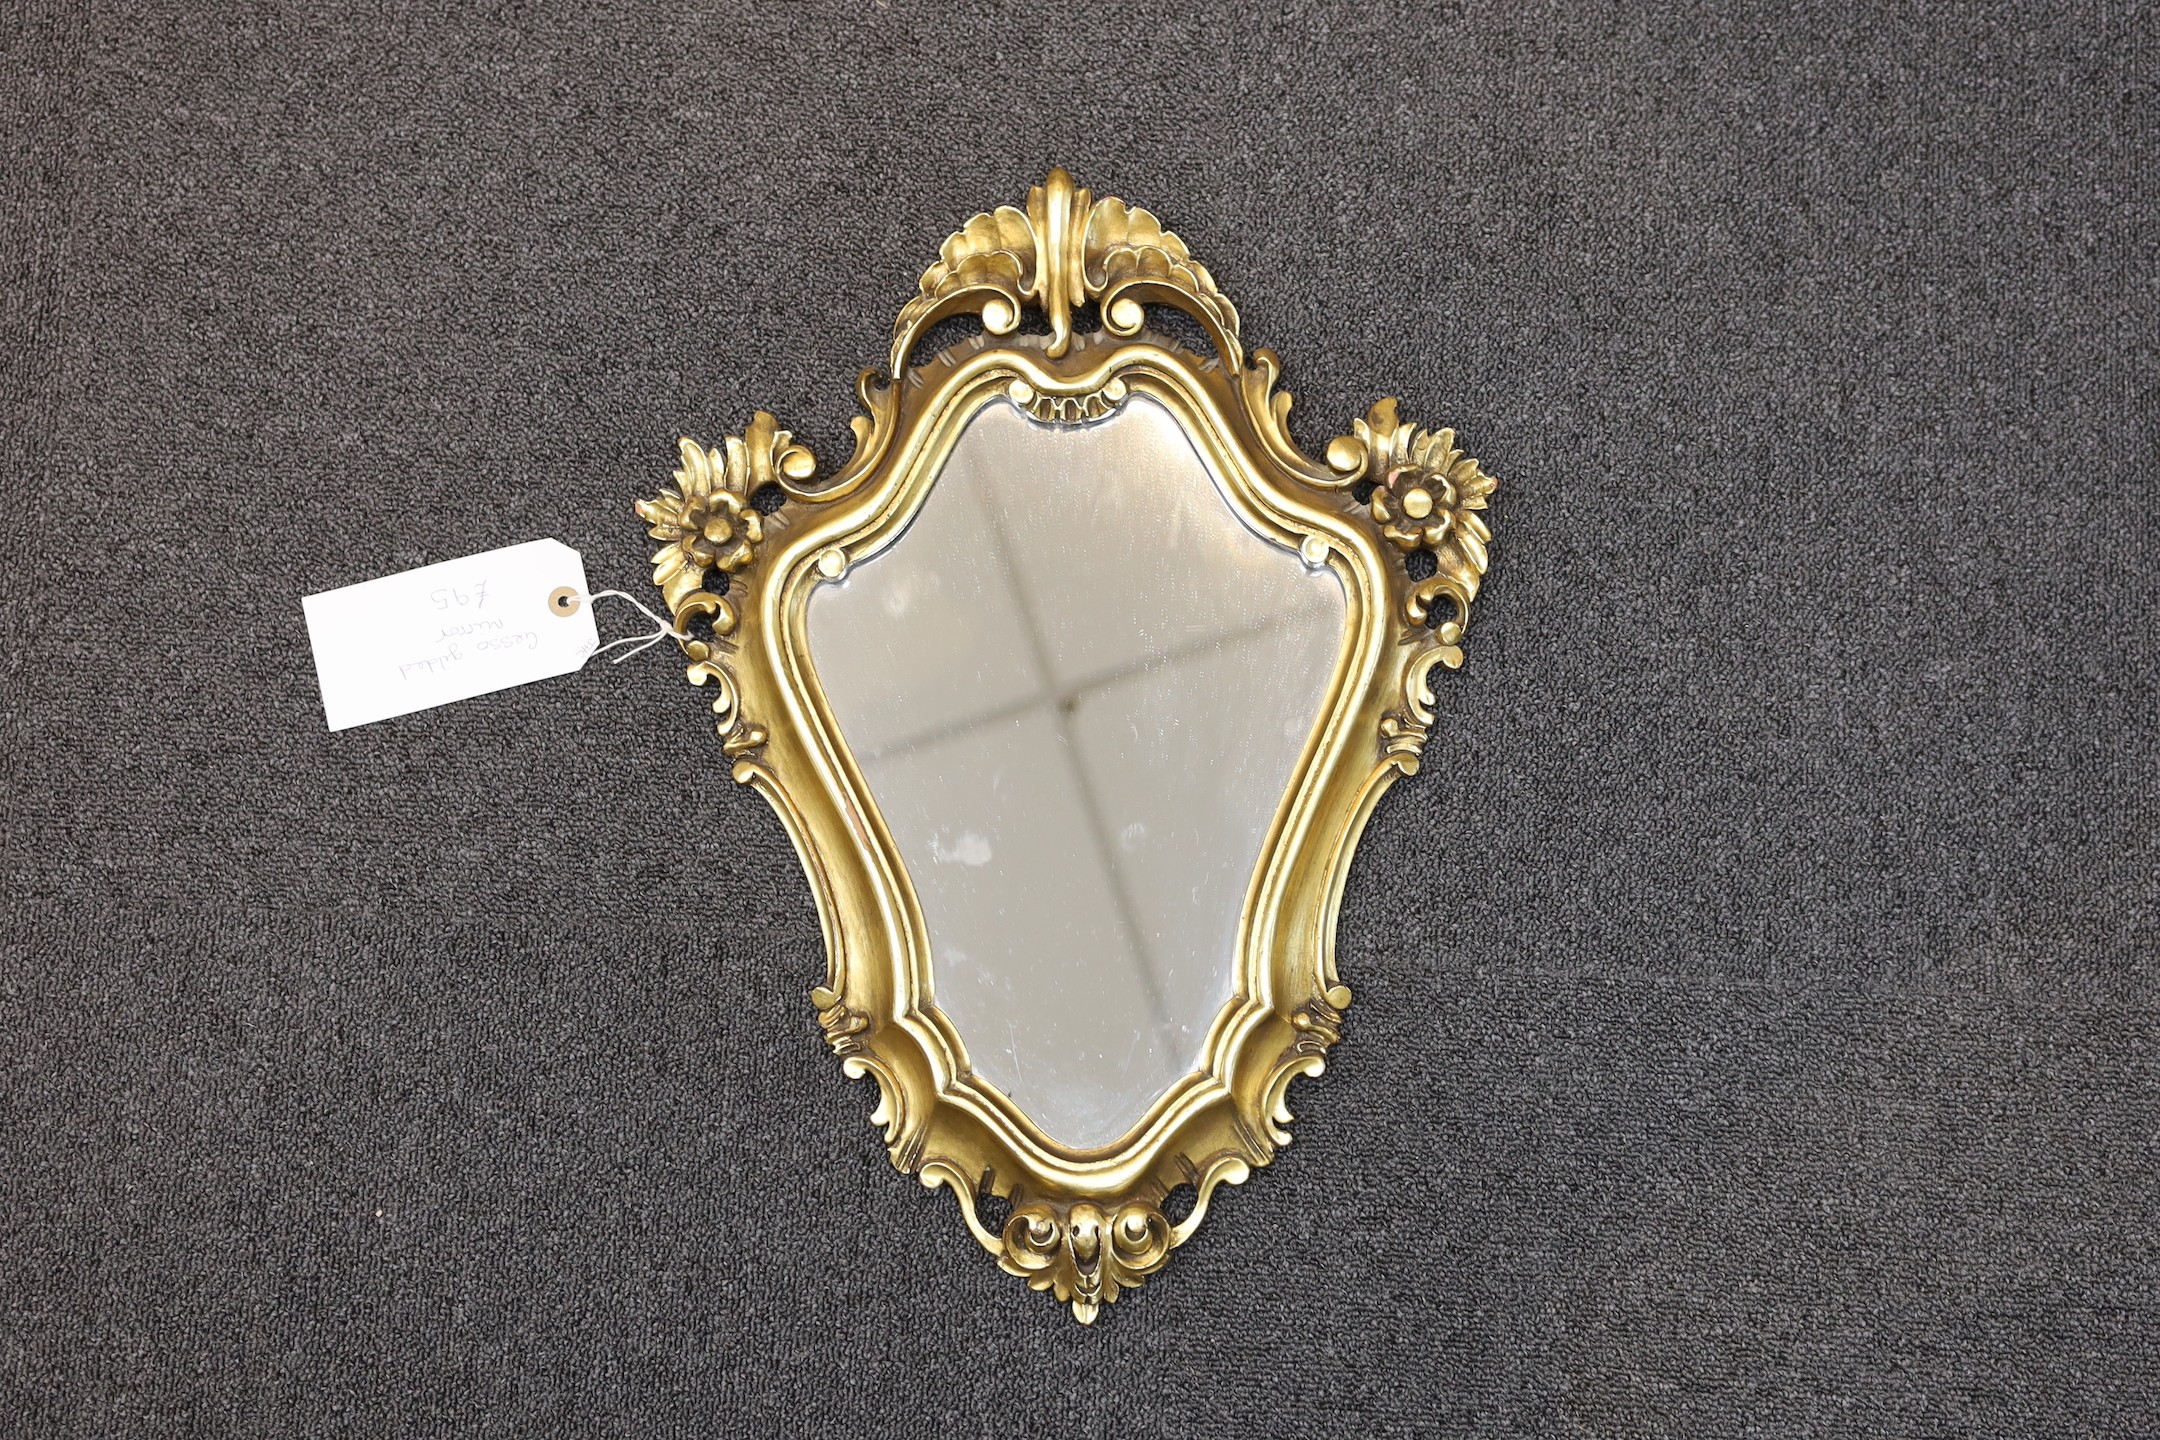 A pair of George III style giltwood cartouche wall mirrors, height 60cm, together with two similar smaller cartouche wall mirrors